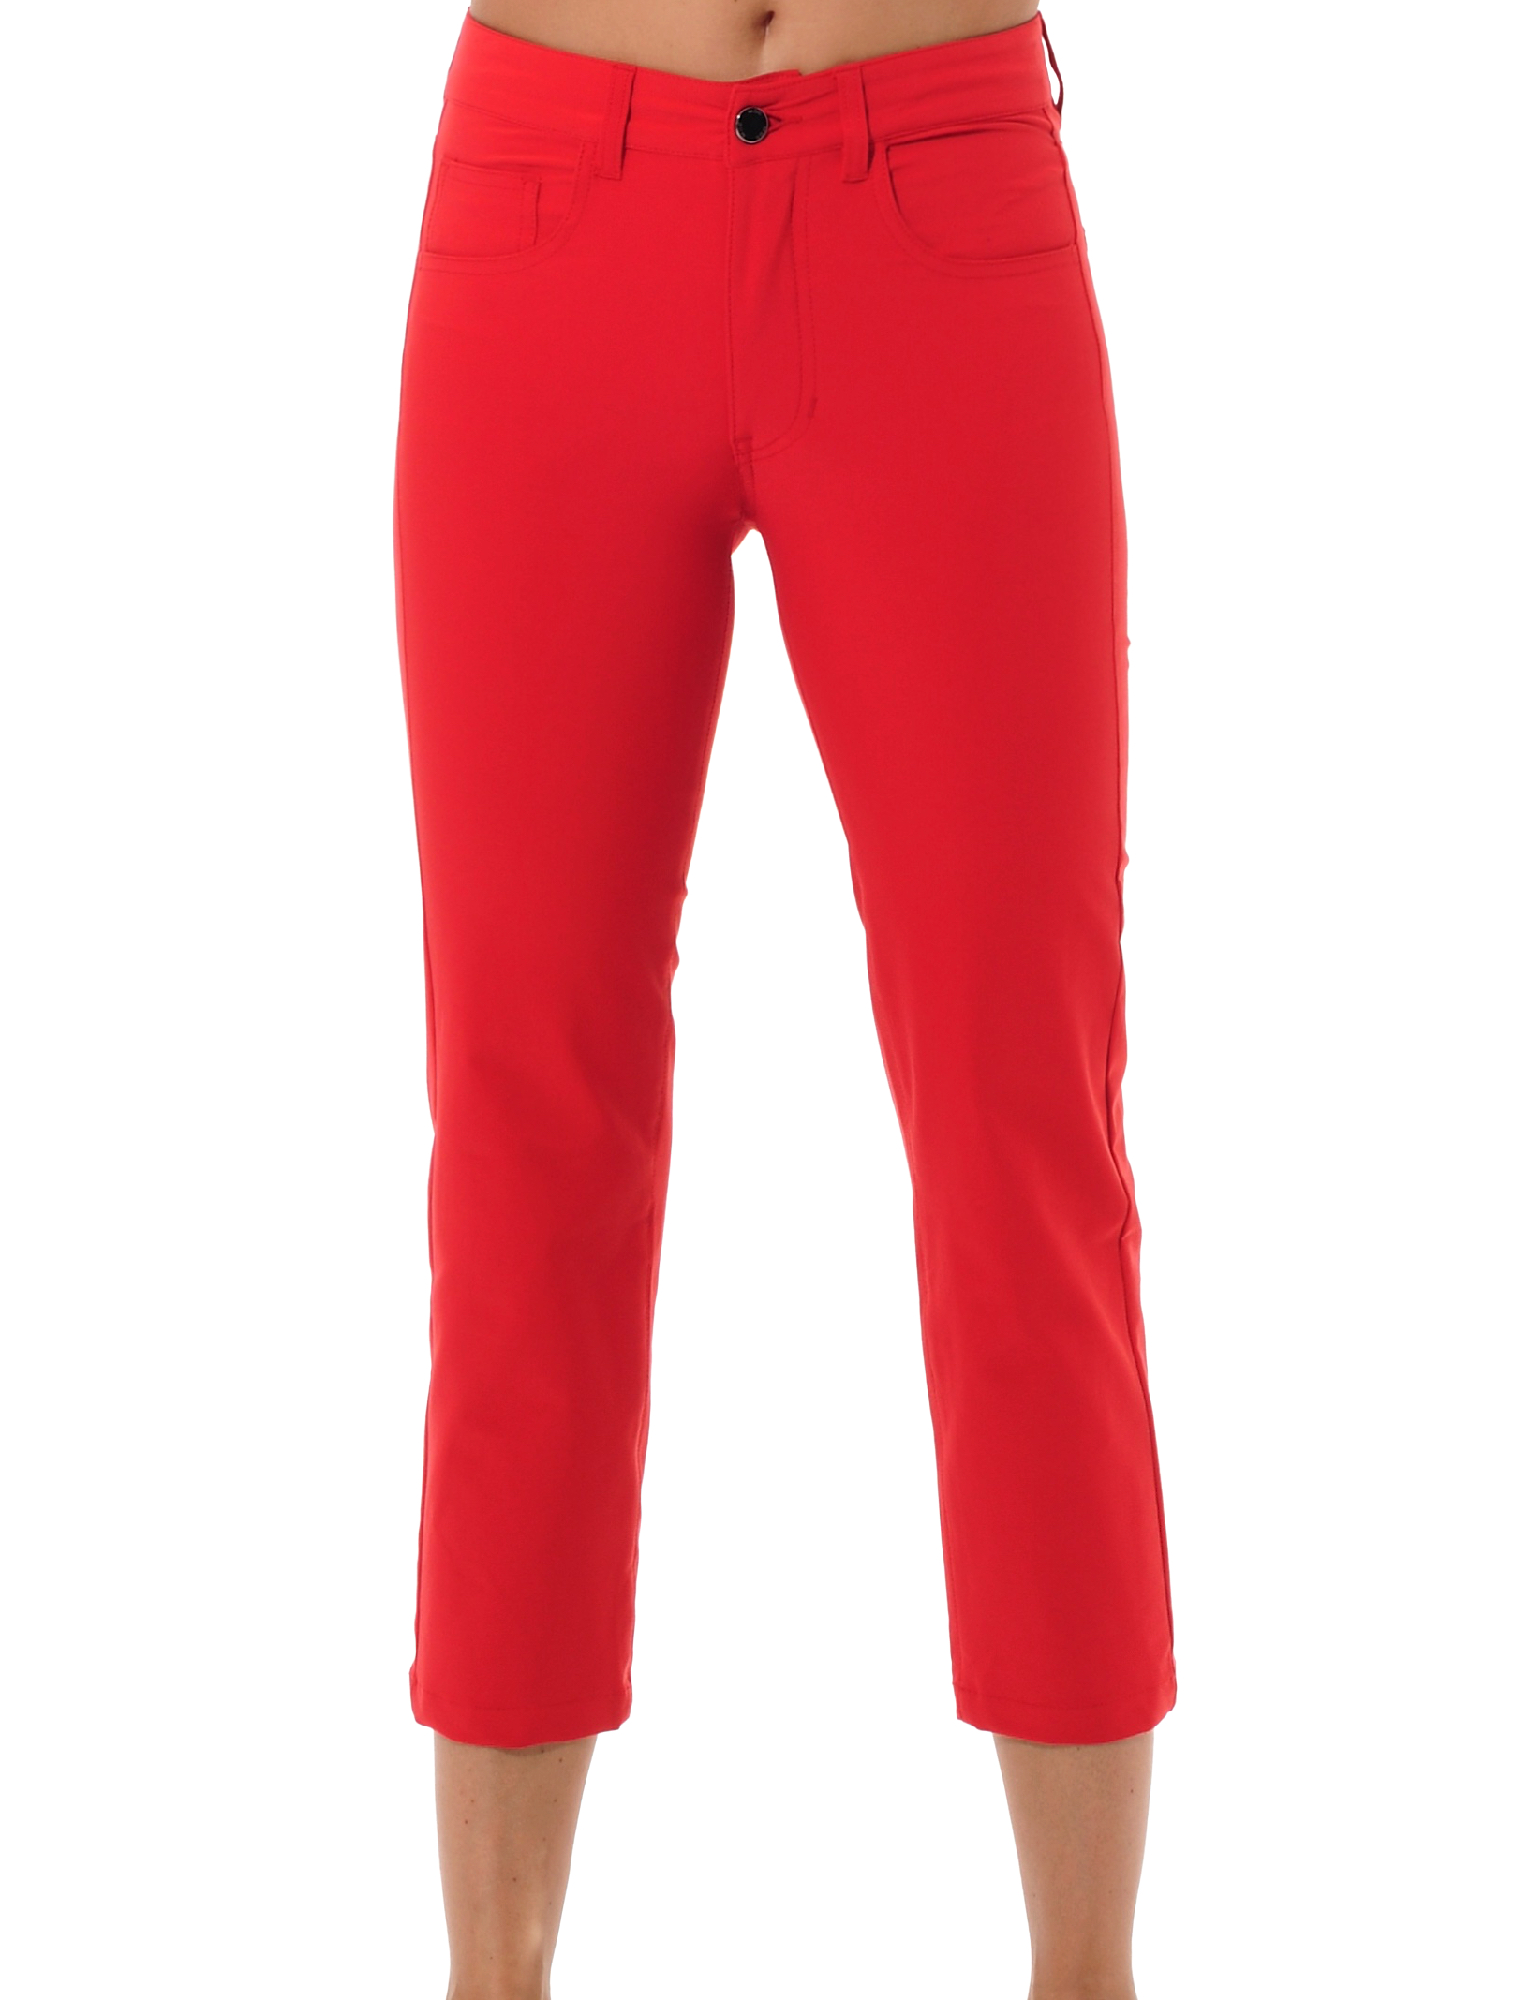 4way stretch cropped straight cut pants red 